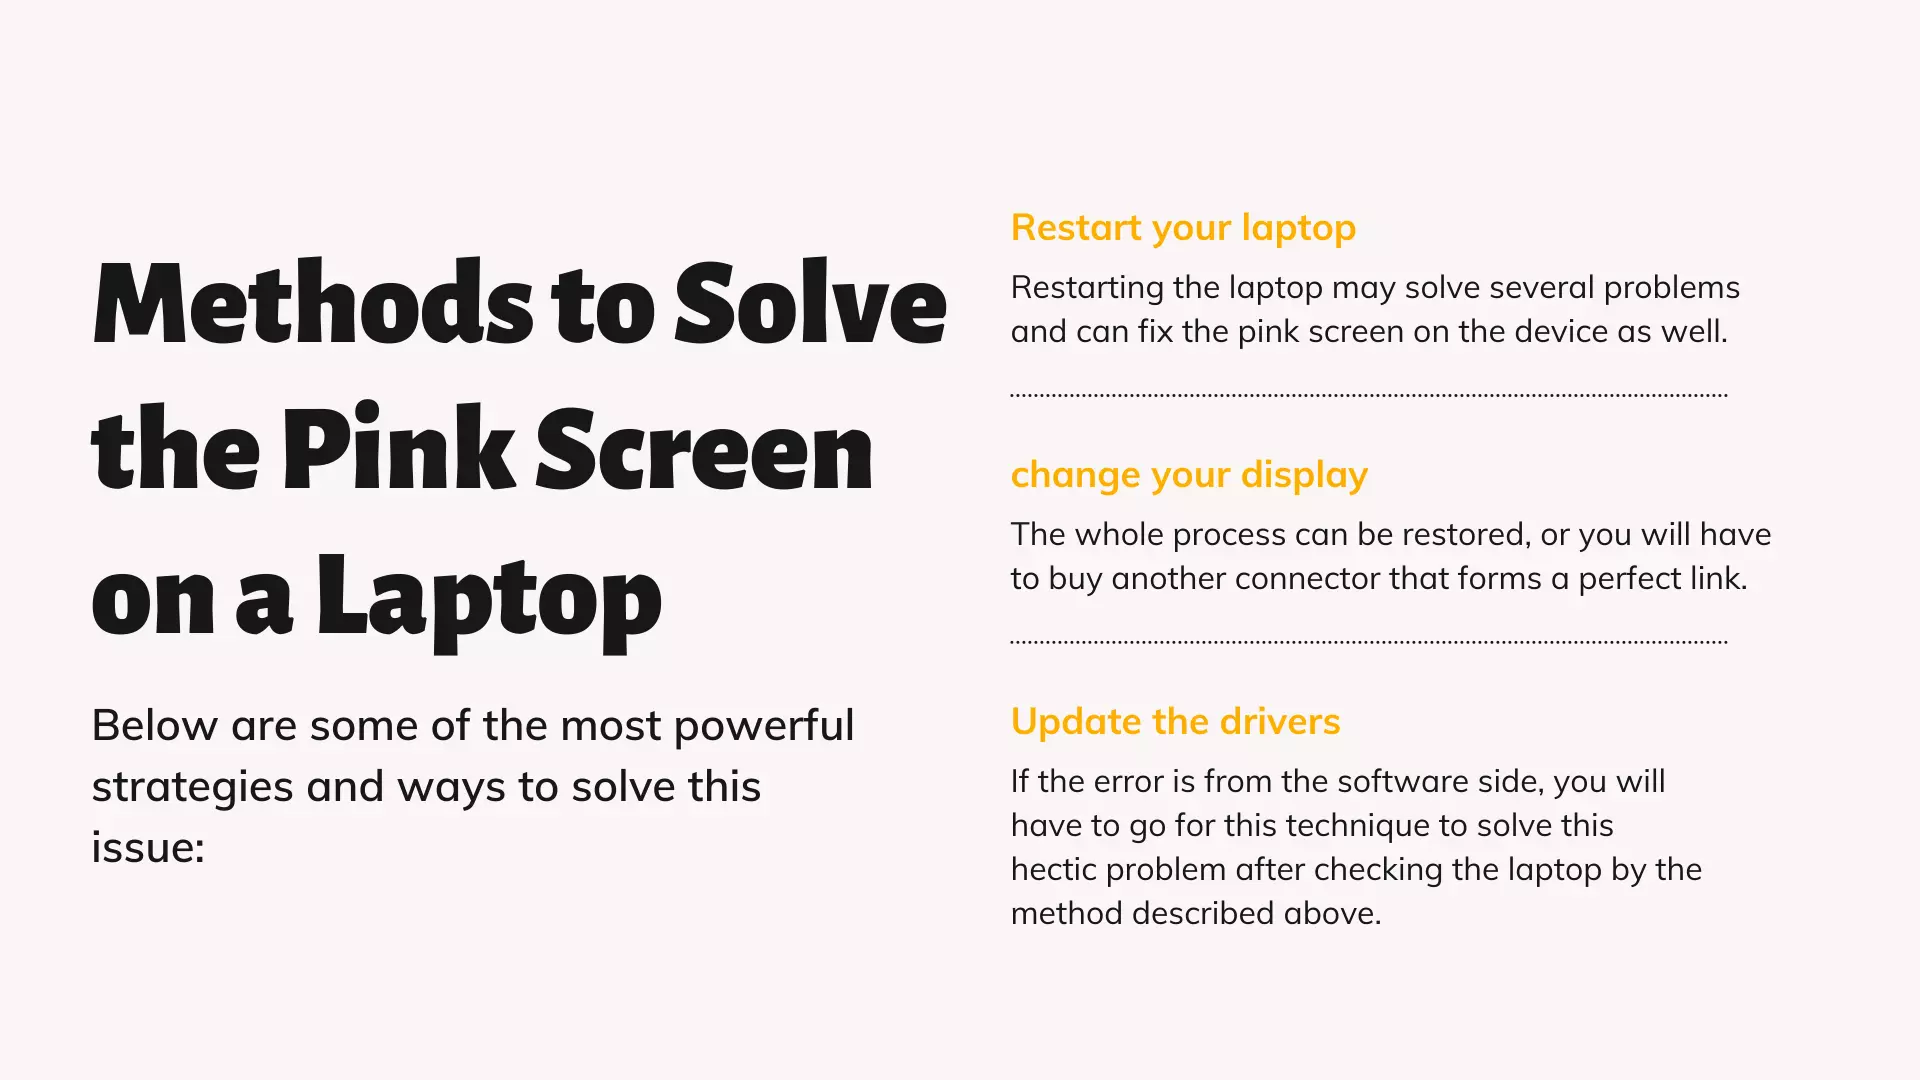 Methods to Solve the Pink Screen on a Laptop